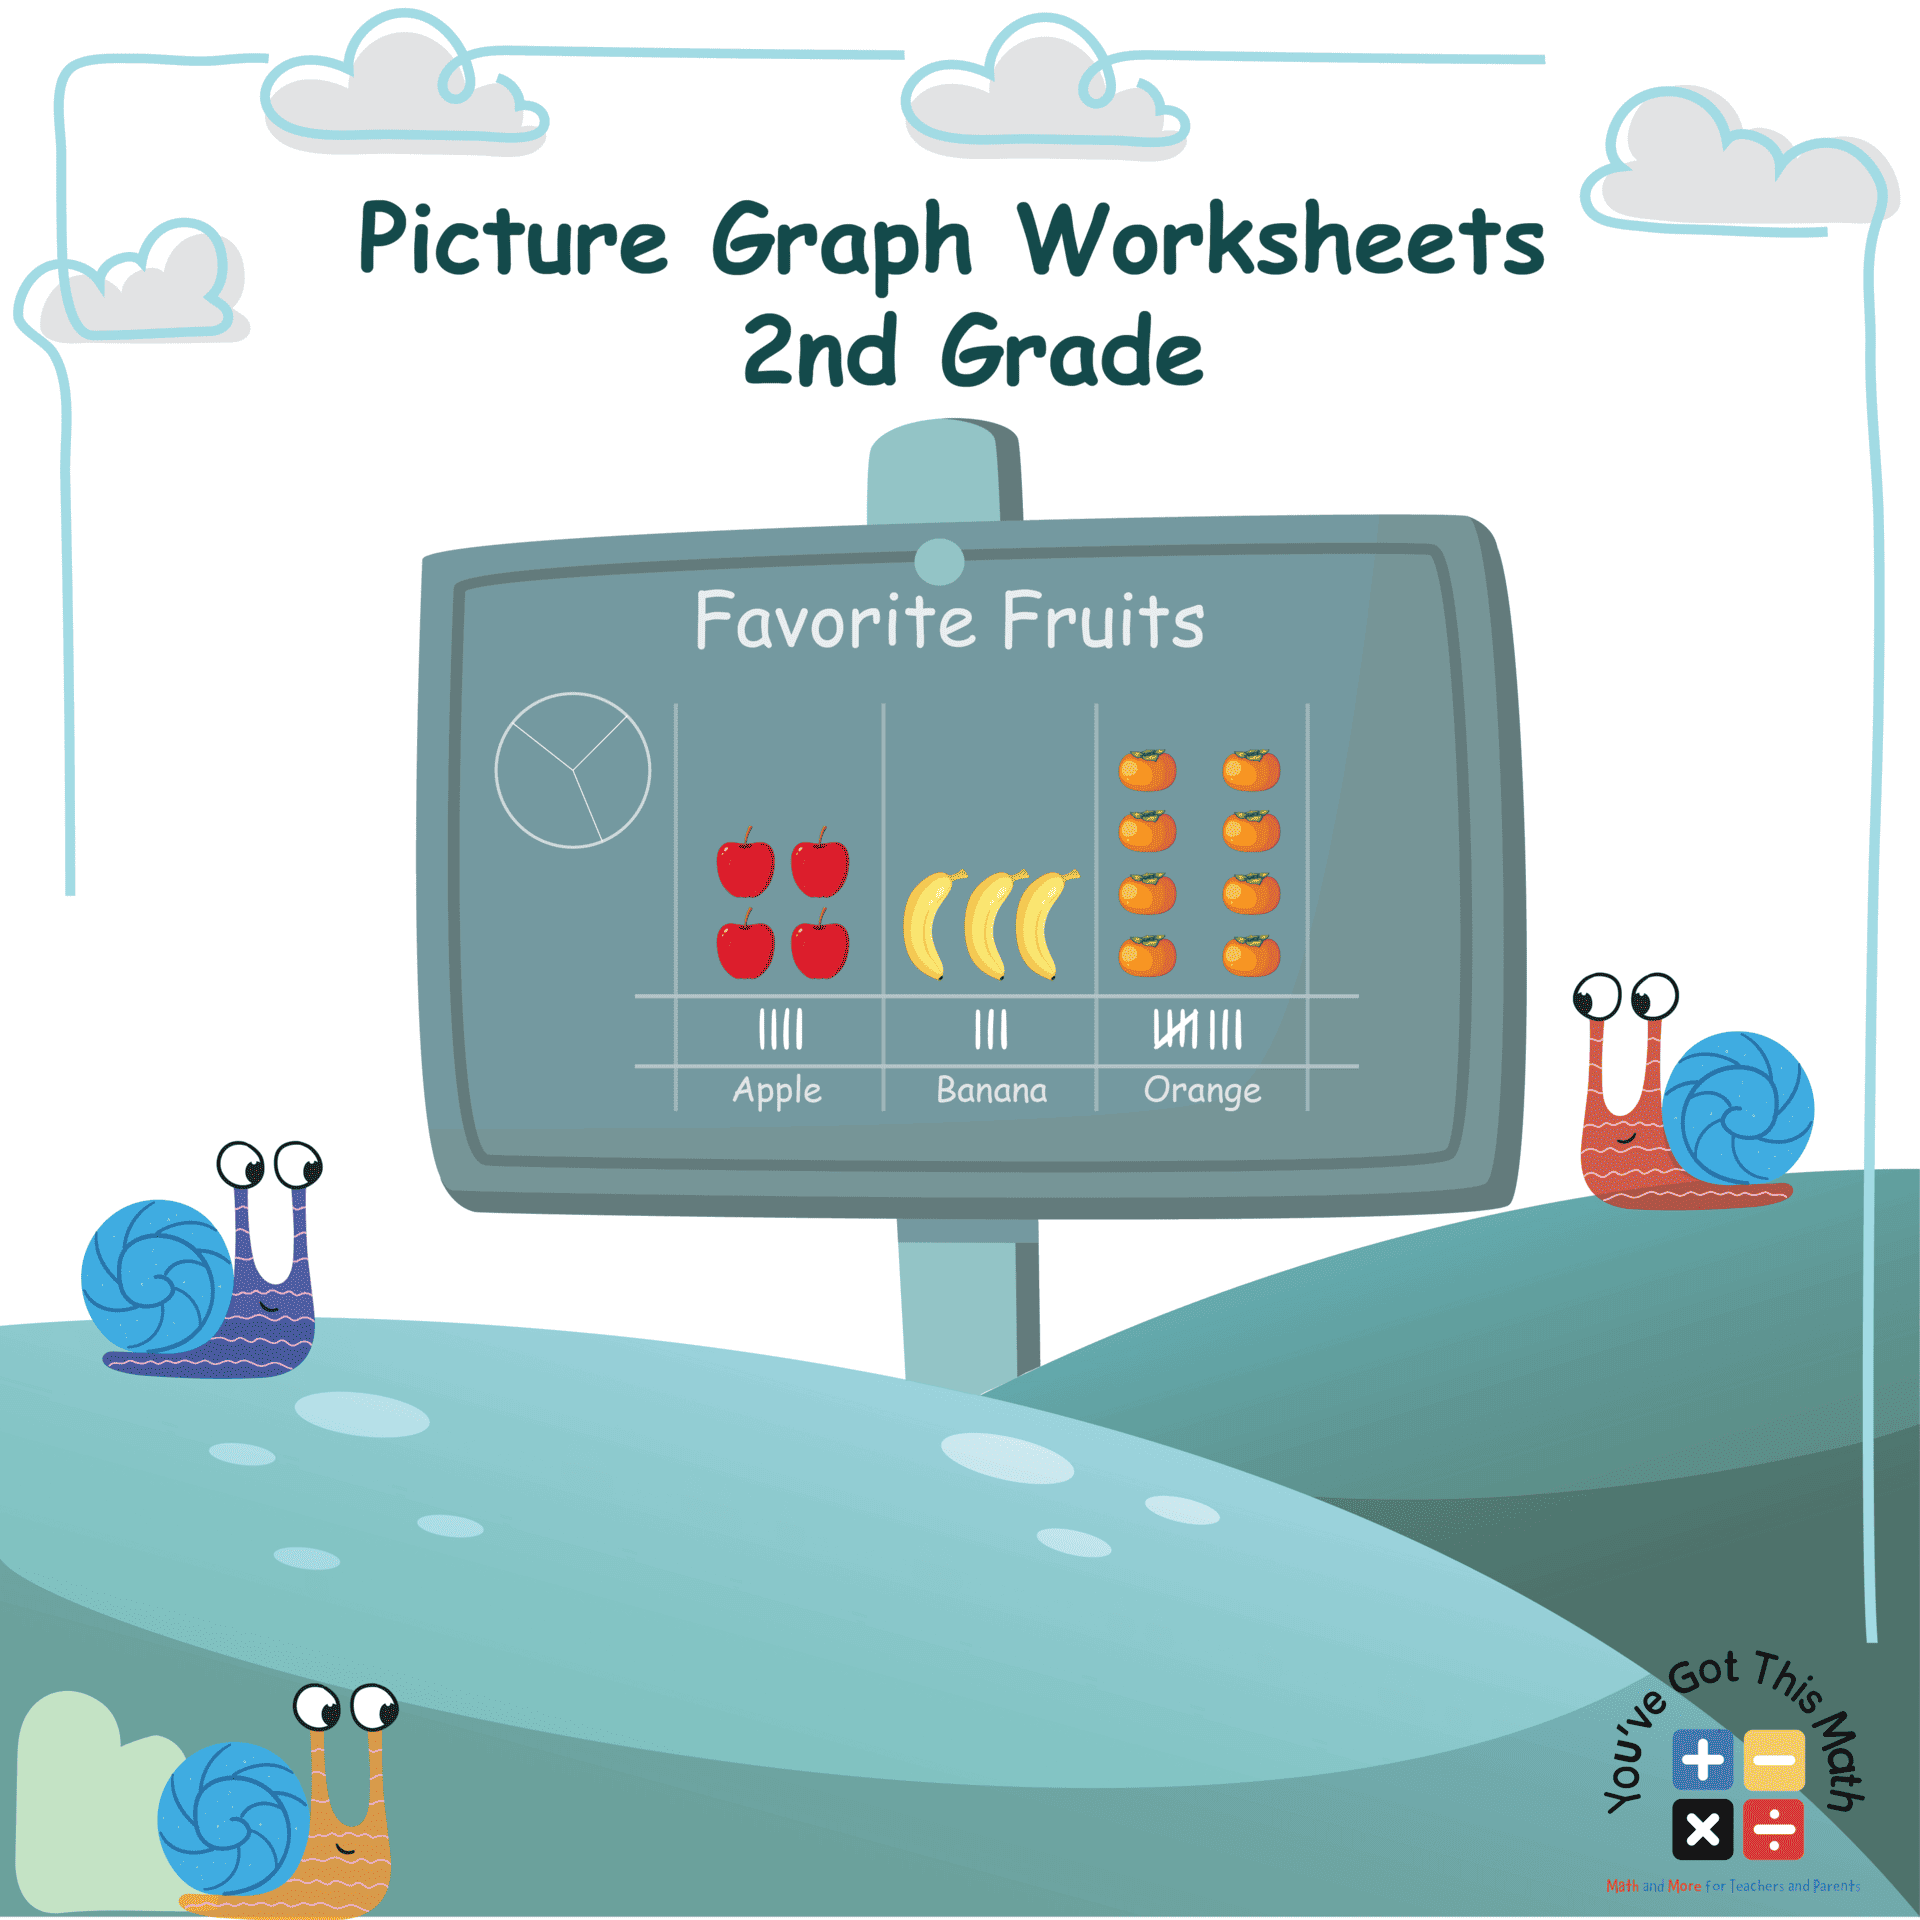 12 Free Picture Graph Worksheets 2nd Grade | Fun Activities